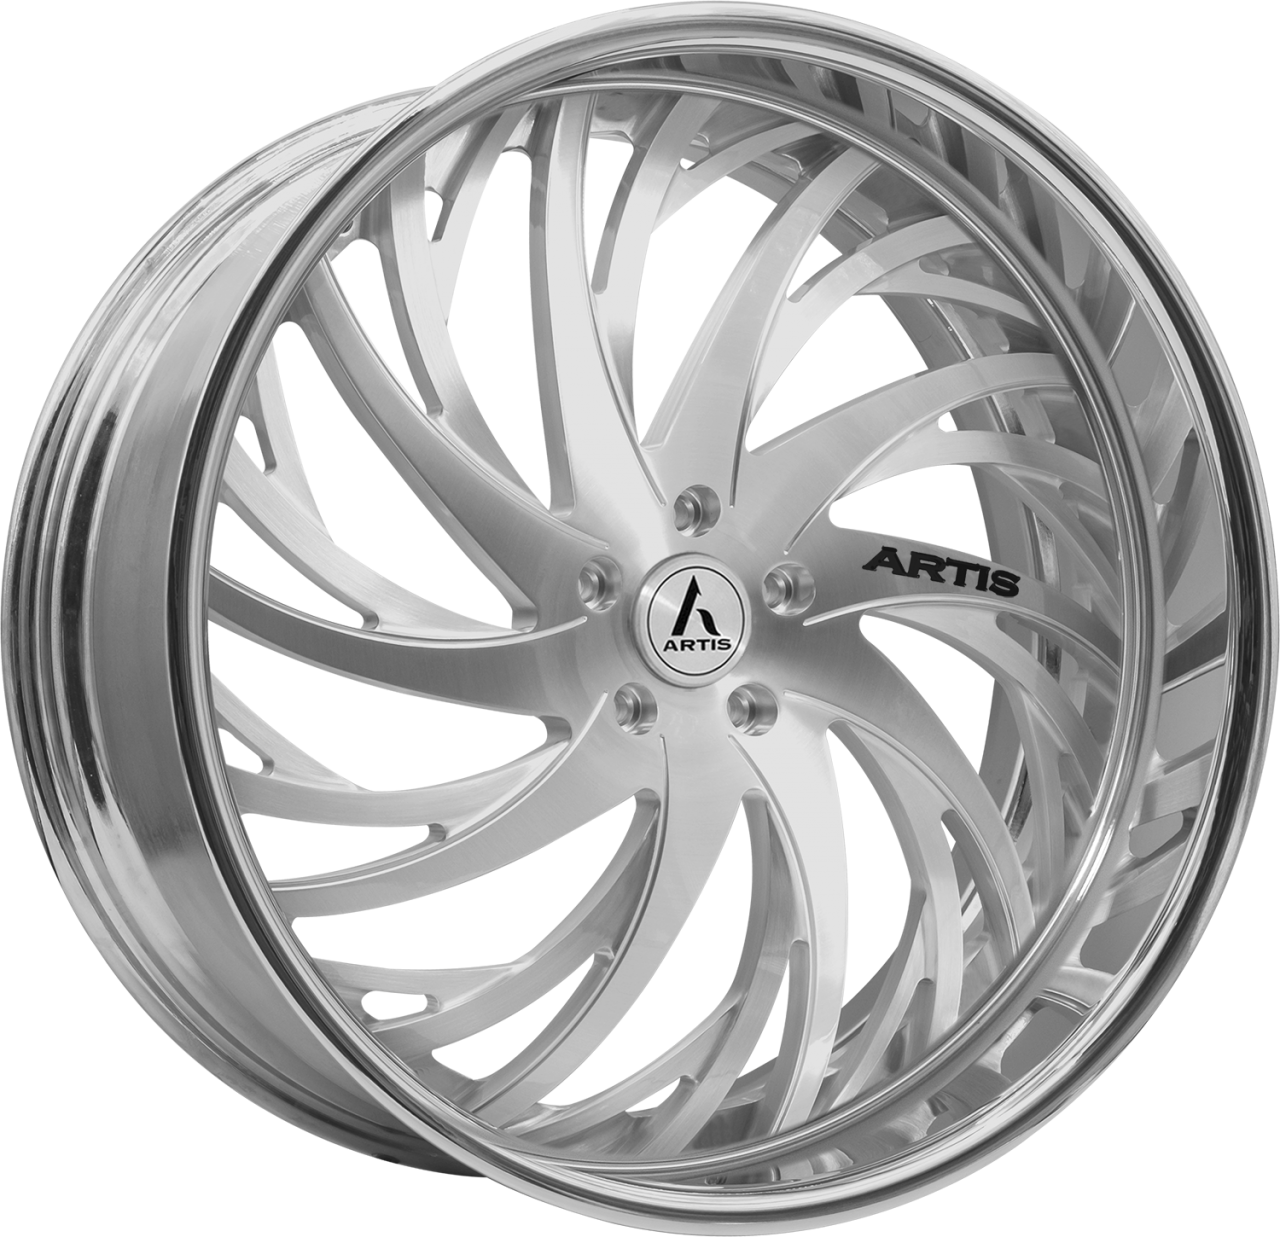 Artis Forged Decatur-M wheel with Brushed finish